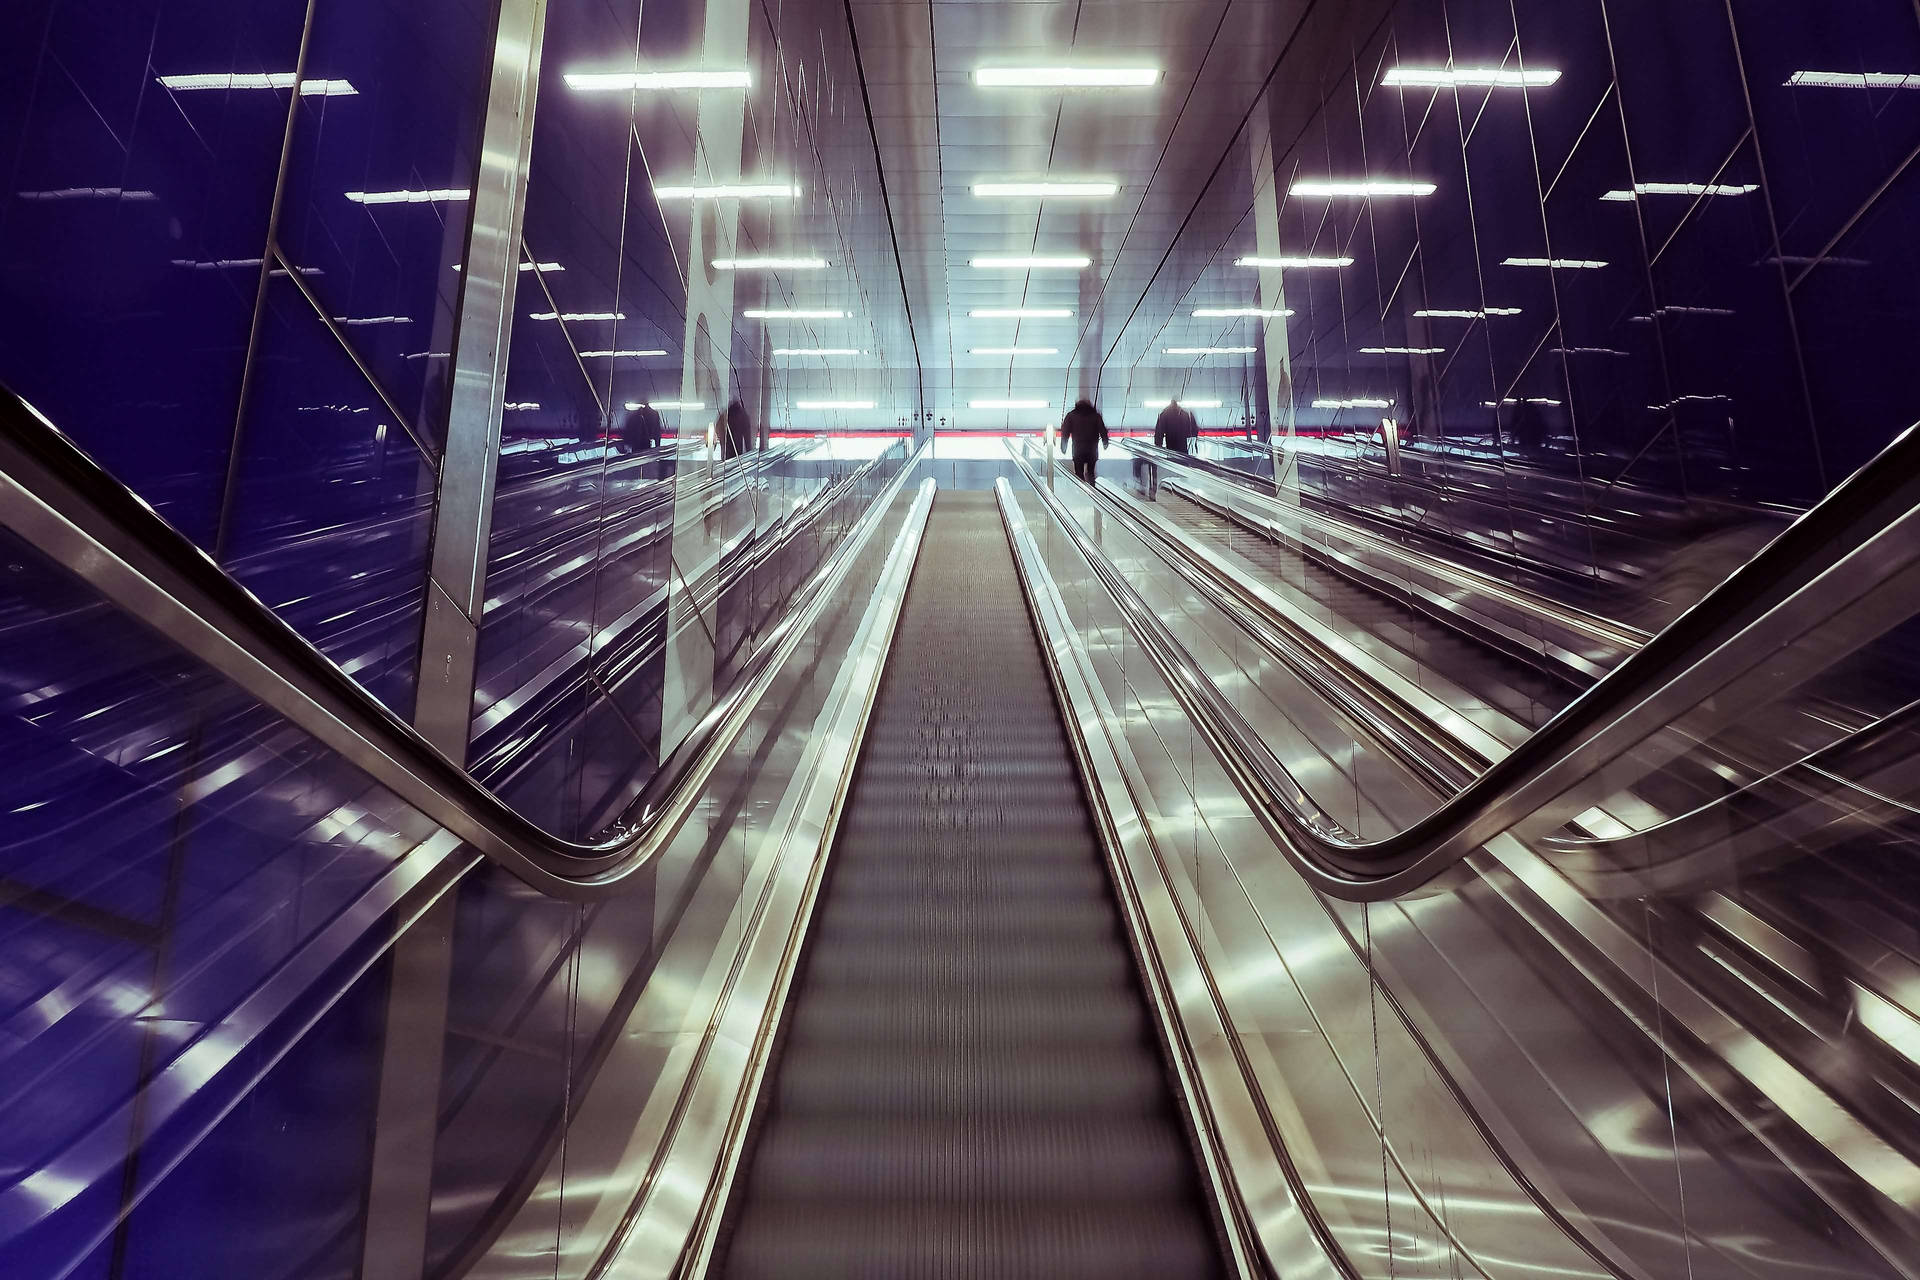 Glassy Escalator At The Airport